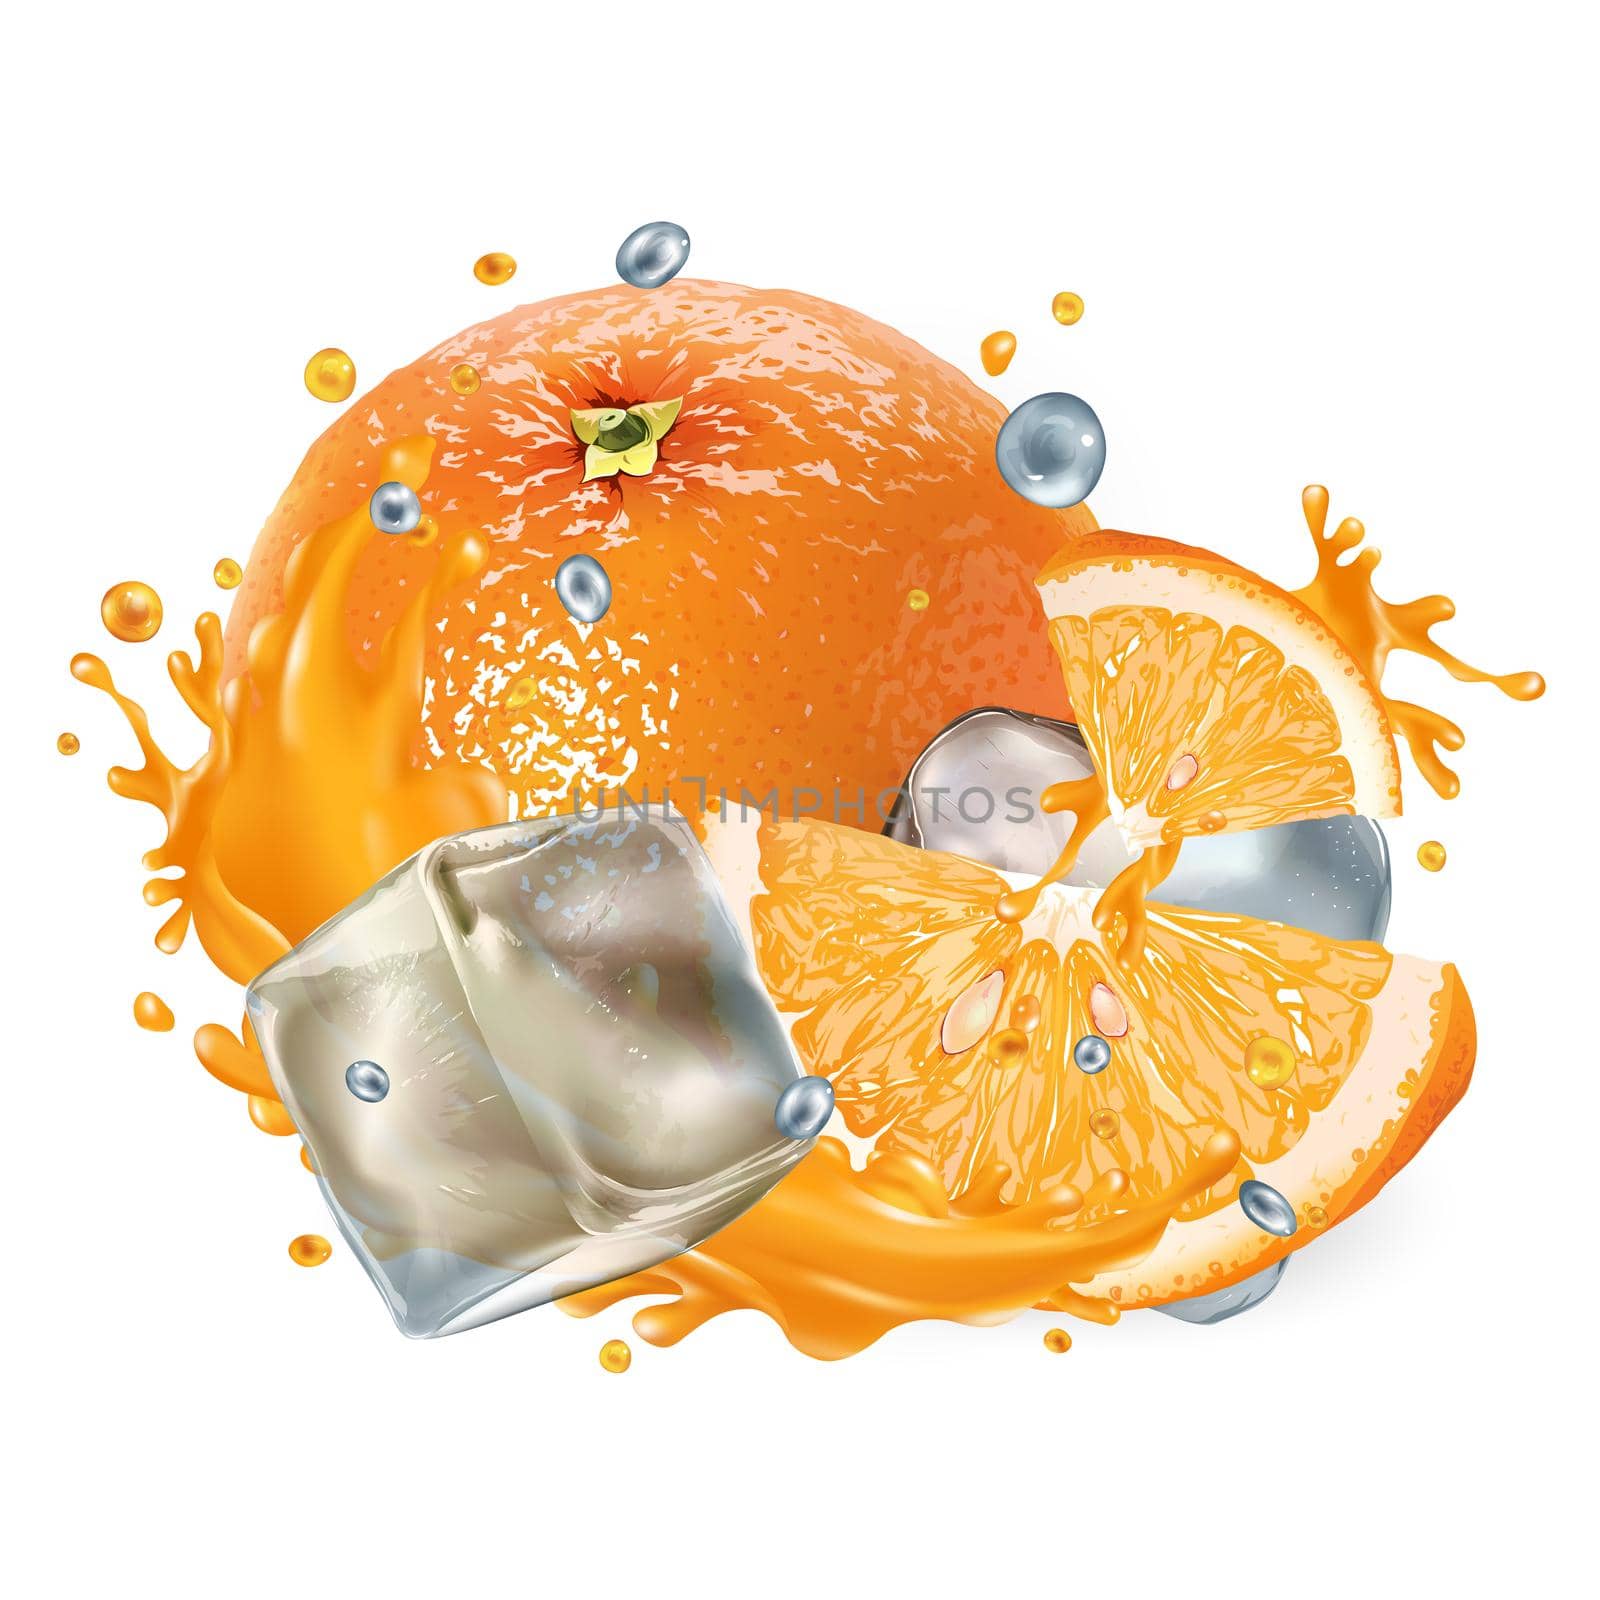 Whole and sliced orange with ice cubes and a splash of juice by ConceptCafe